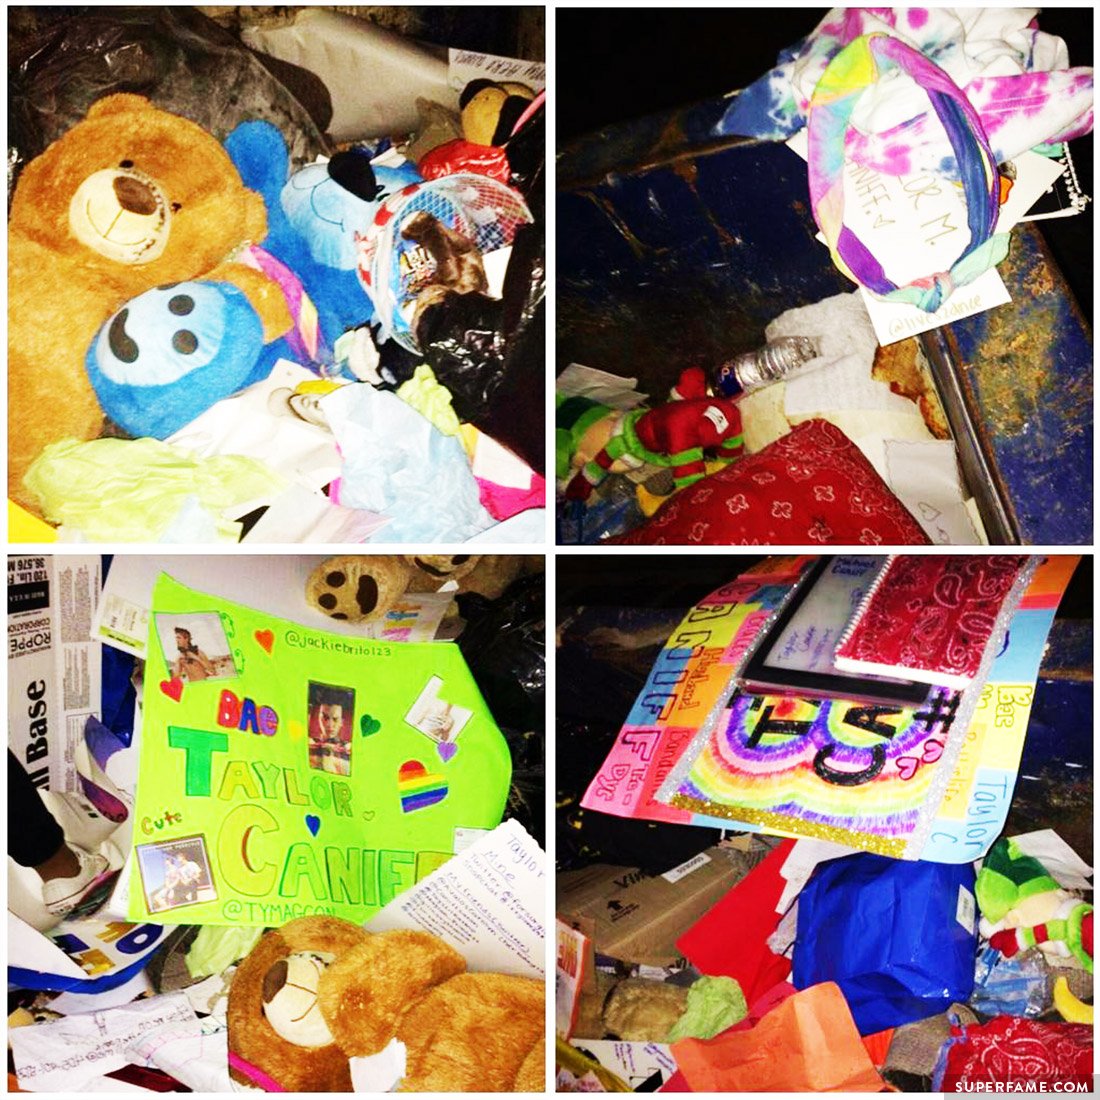 Taylor Caniff throws away gifts.